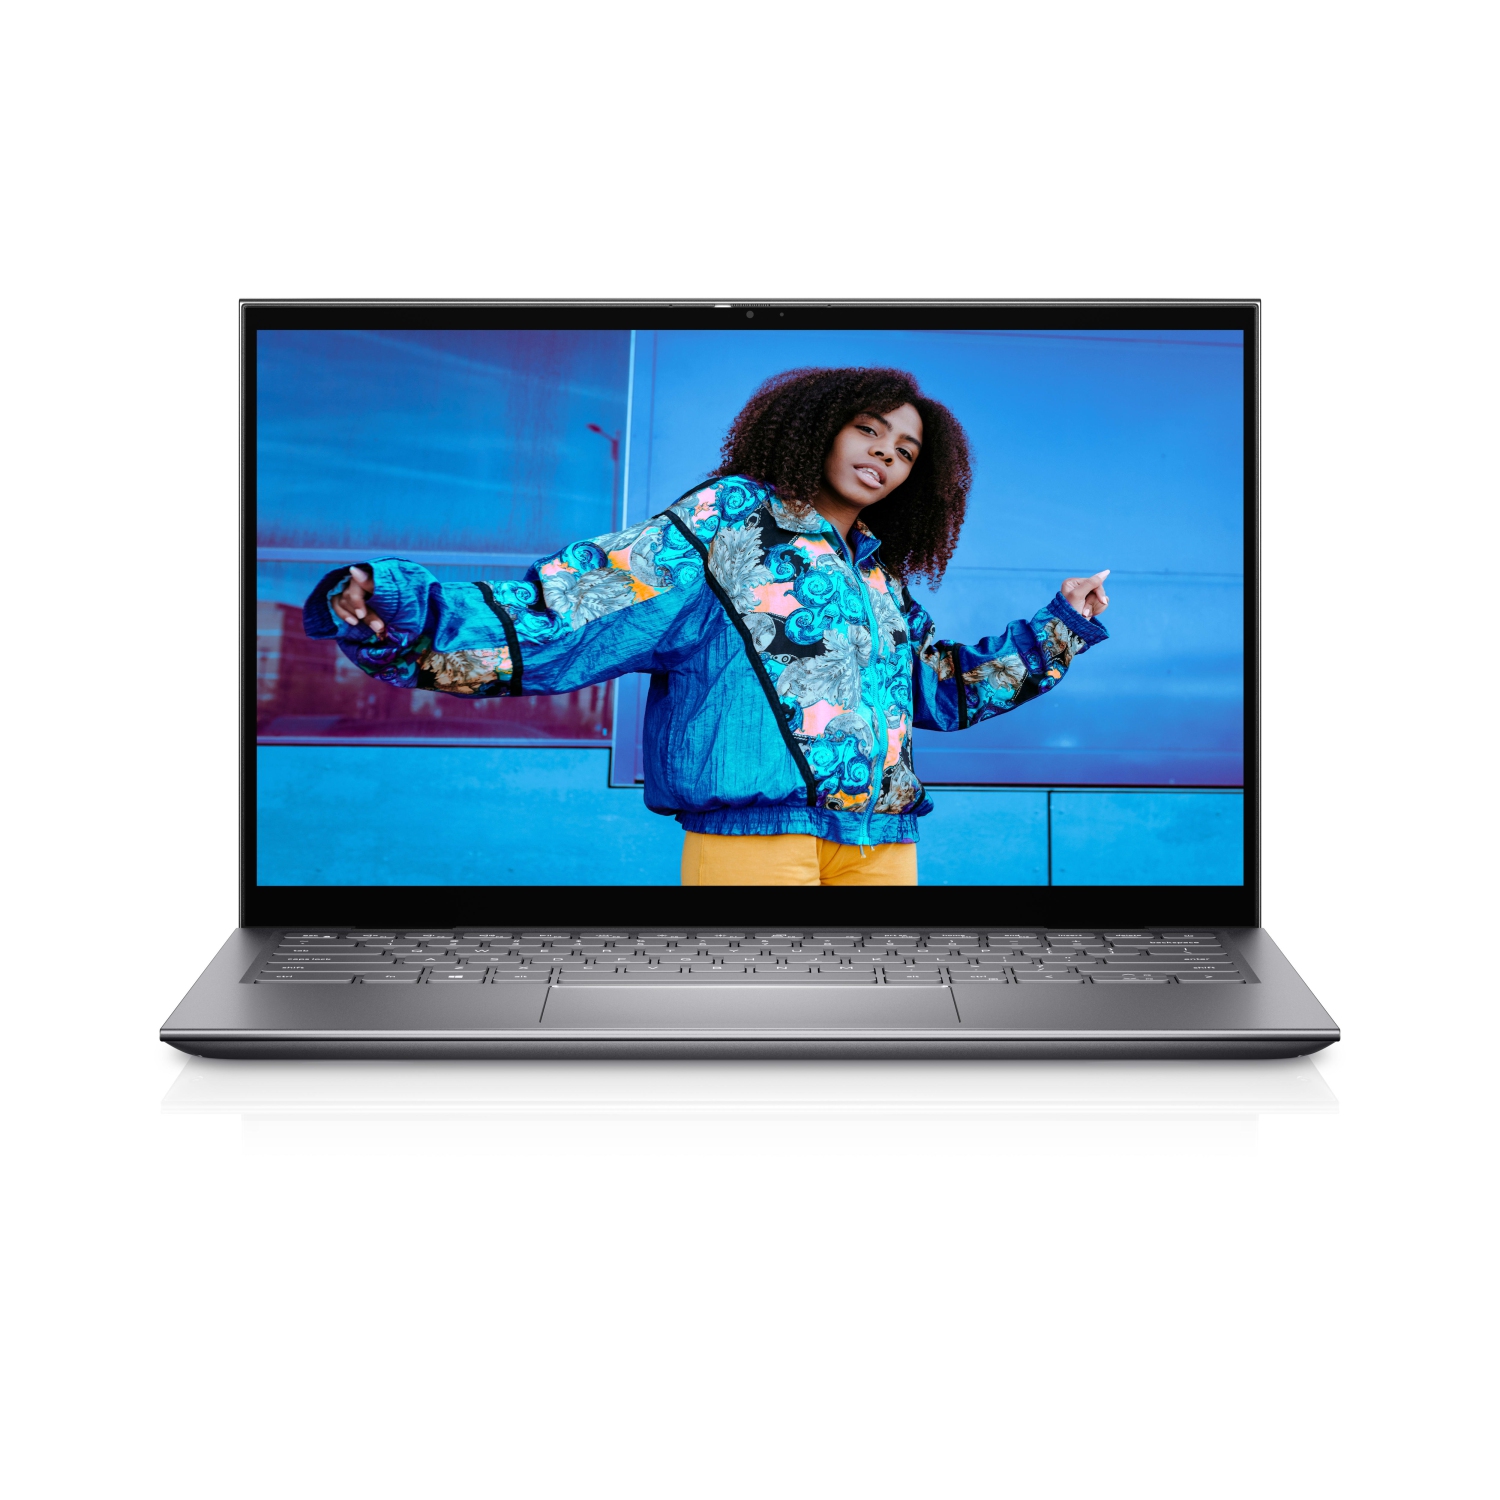 Refurbished (Excellent) – Dell Inspiron 5410 2-in-1 (2021) | 14" FHD Touch | Core i5 - 256GB SSD - 32GB RAM | 4 Cores @ 4.2 GHz - 11th Gen CPU